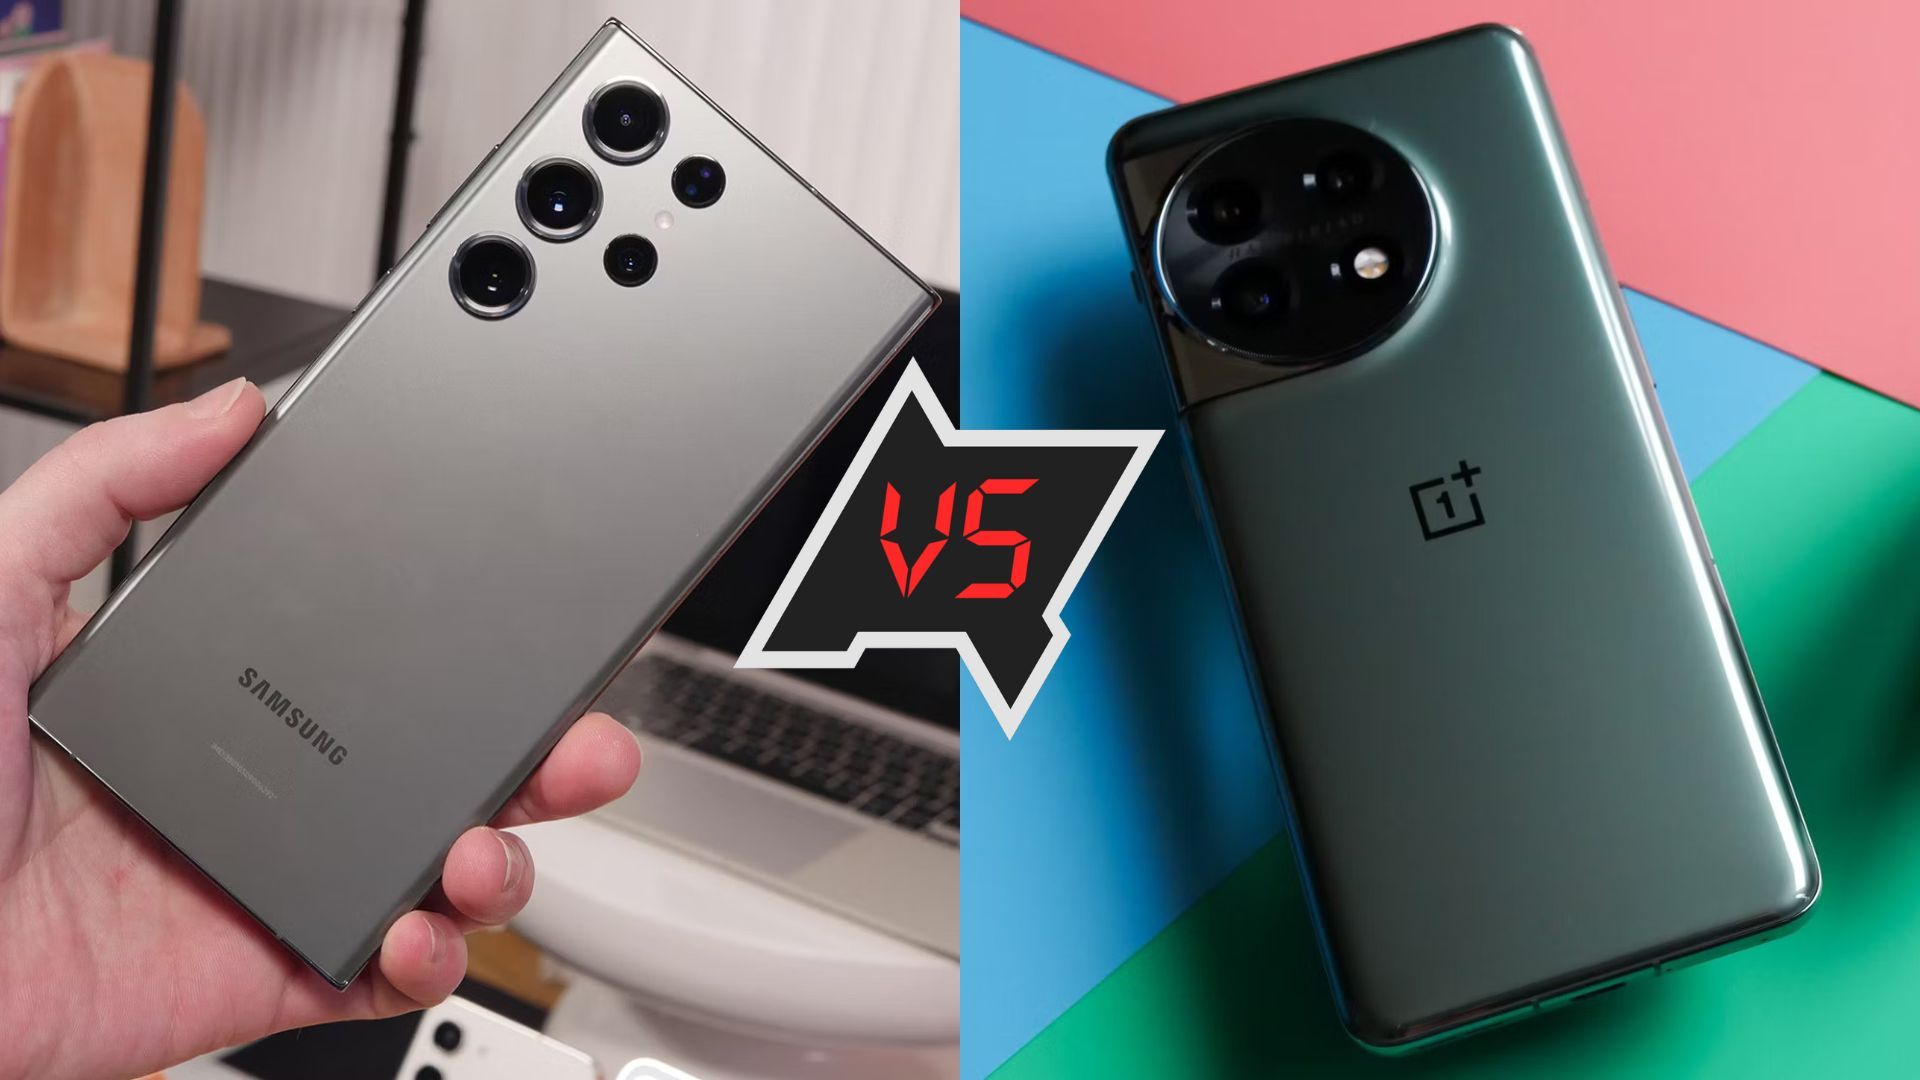 Samsung Galaxy S23 Ultra vs. OnePlus 11 - Which Reigns Supreme?